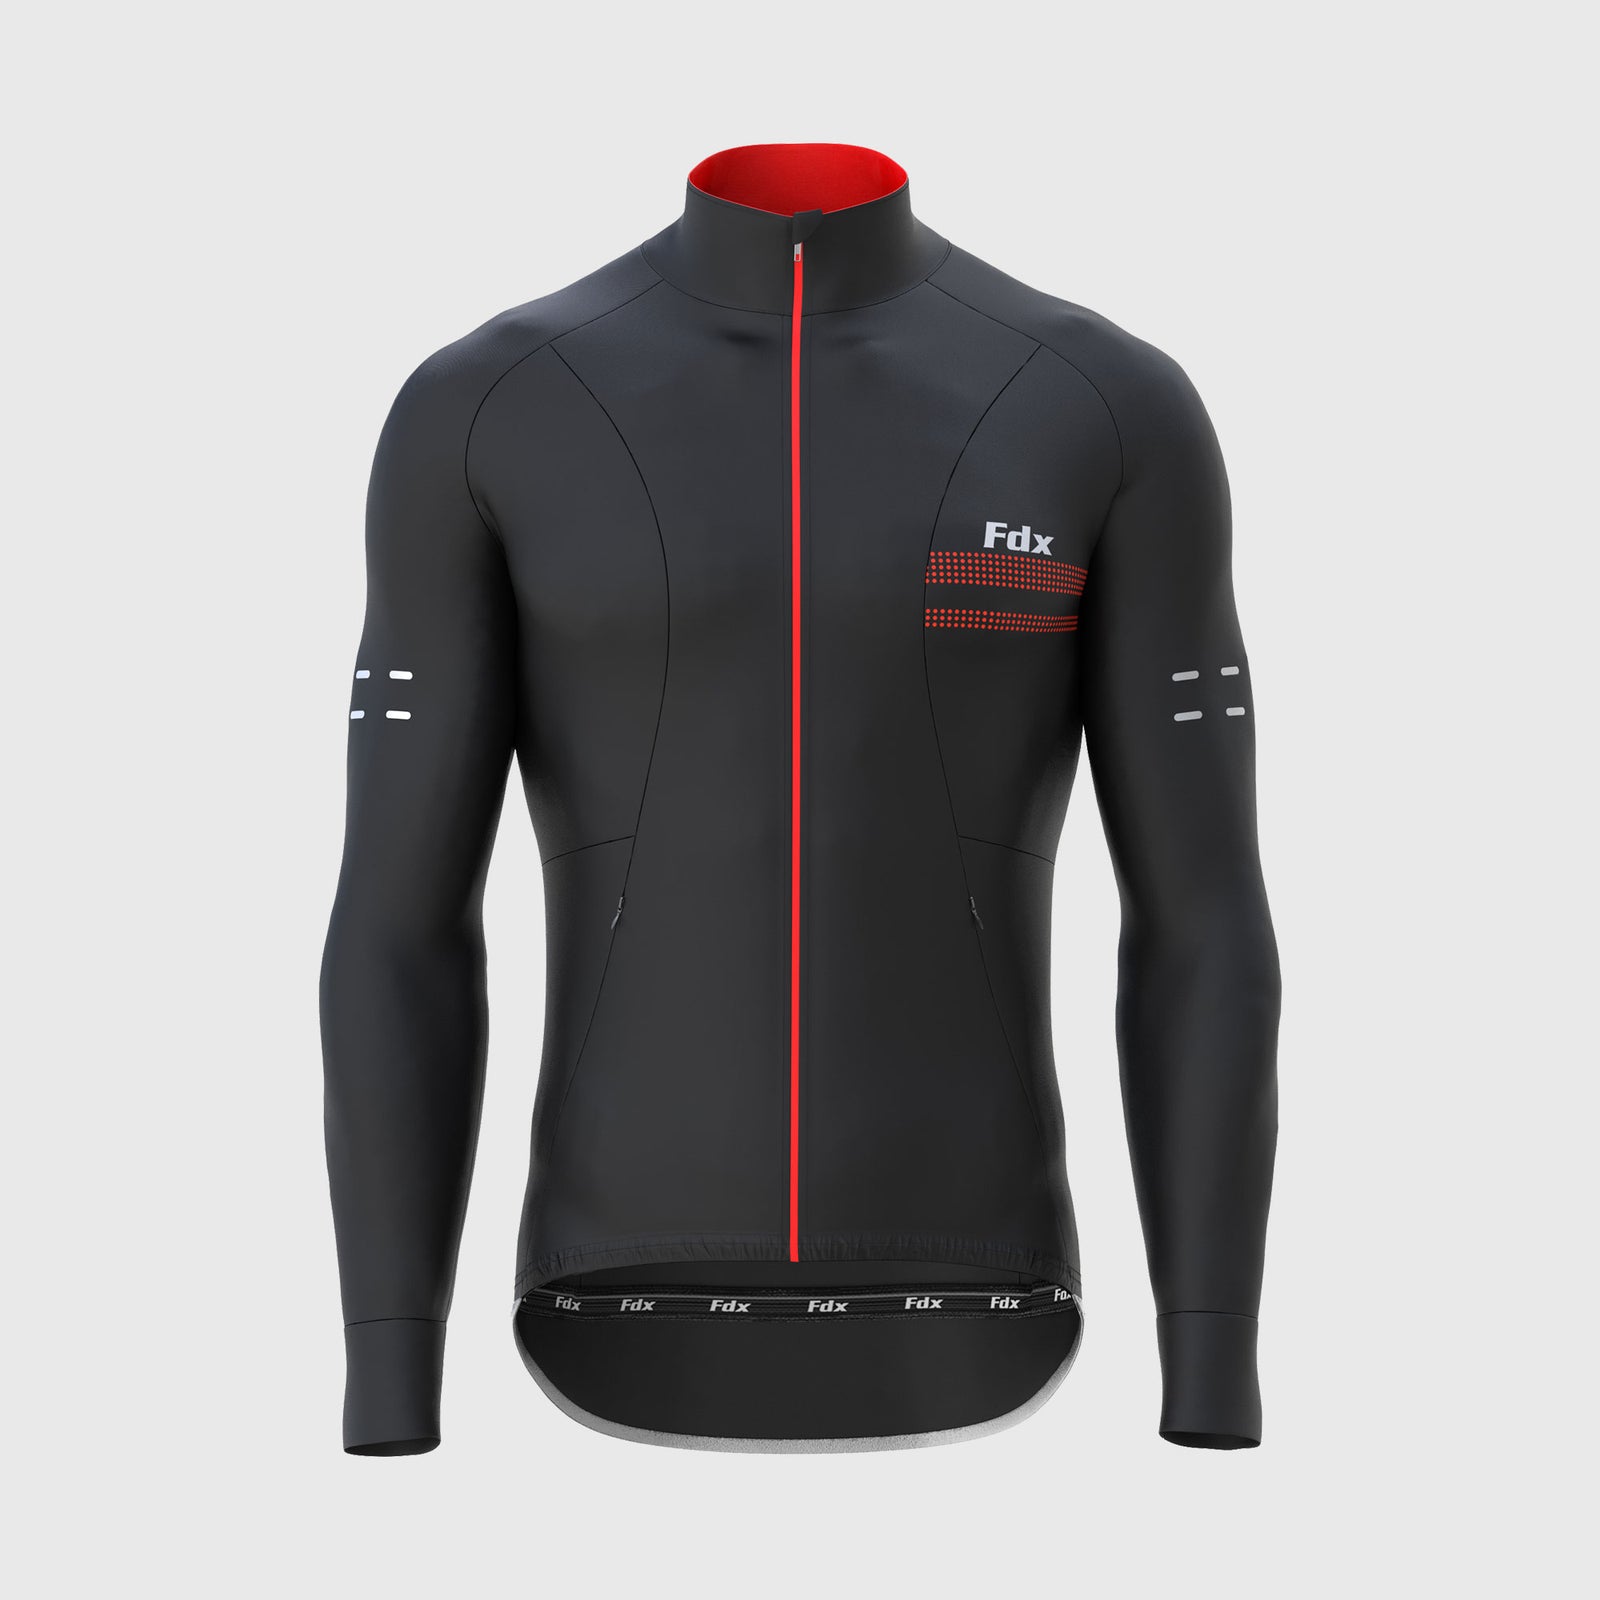 Discover the latest in Winter Cycling Wear: The PURE range from Inverse